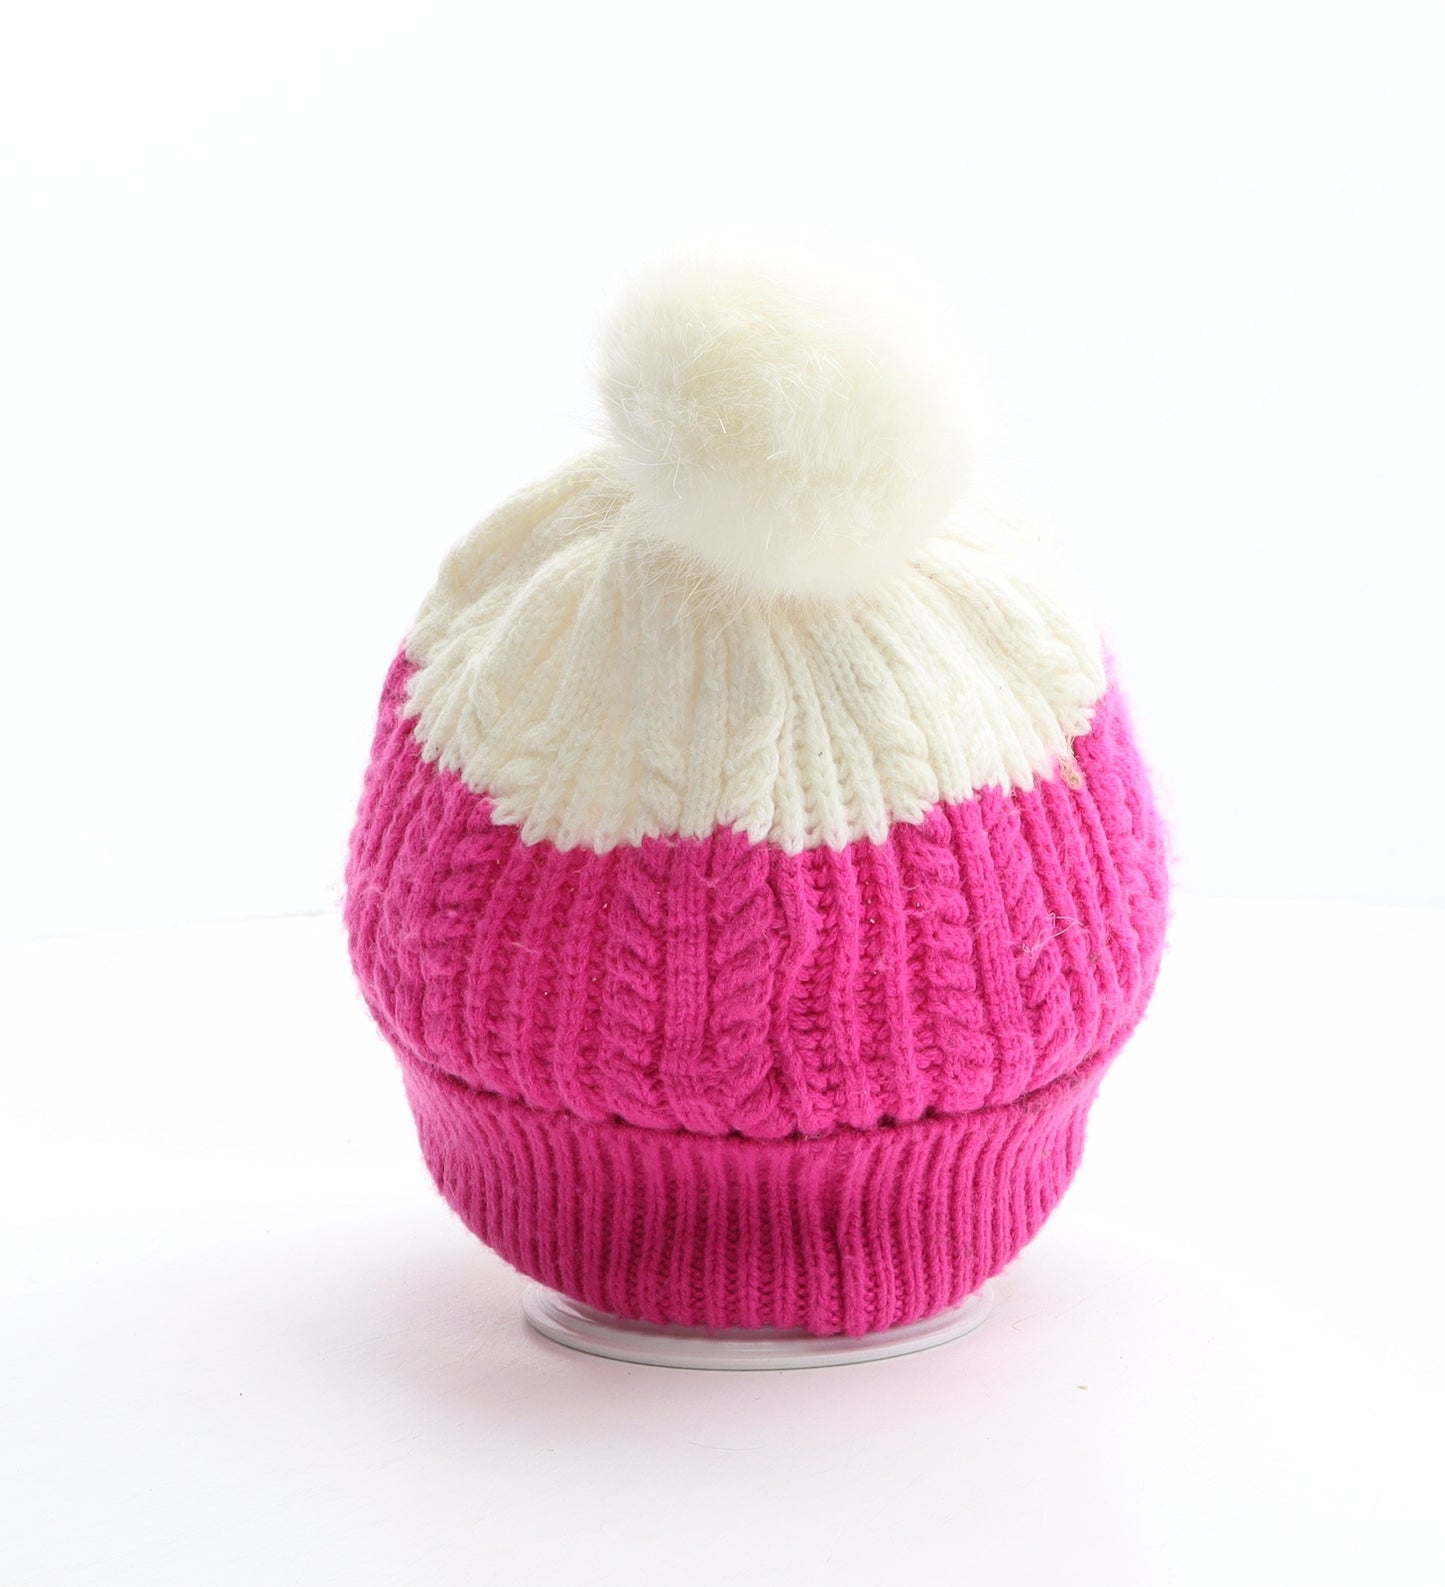 Joules Girls Pink Acrylic Bobble Hat One Size